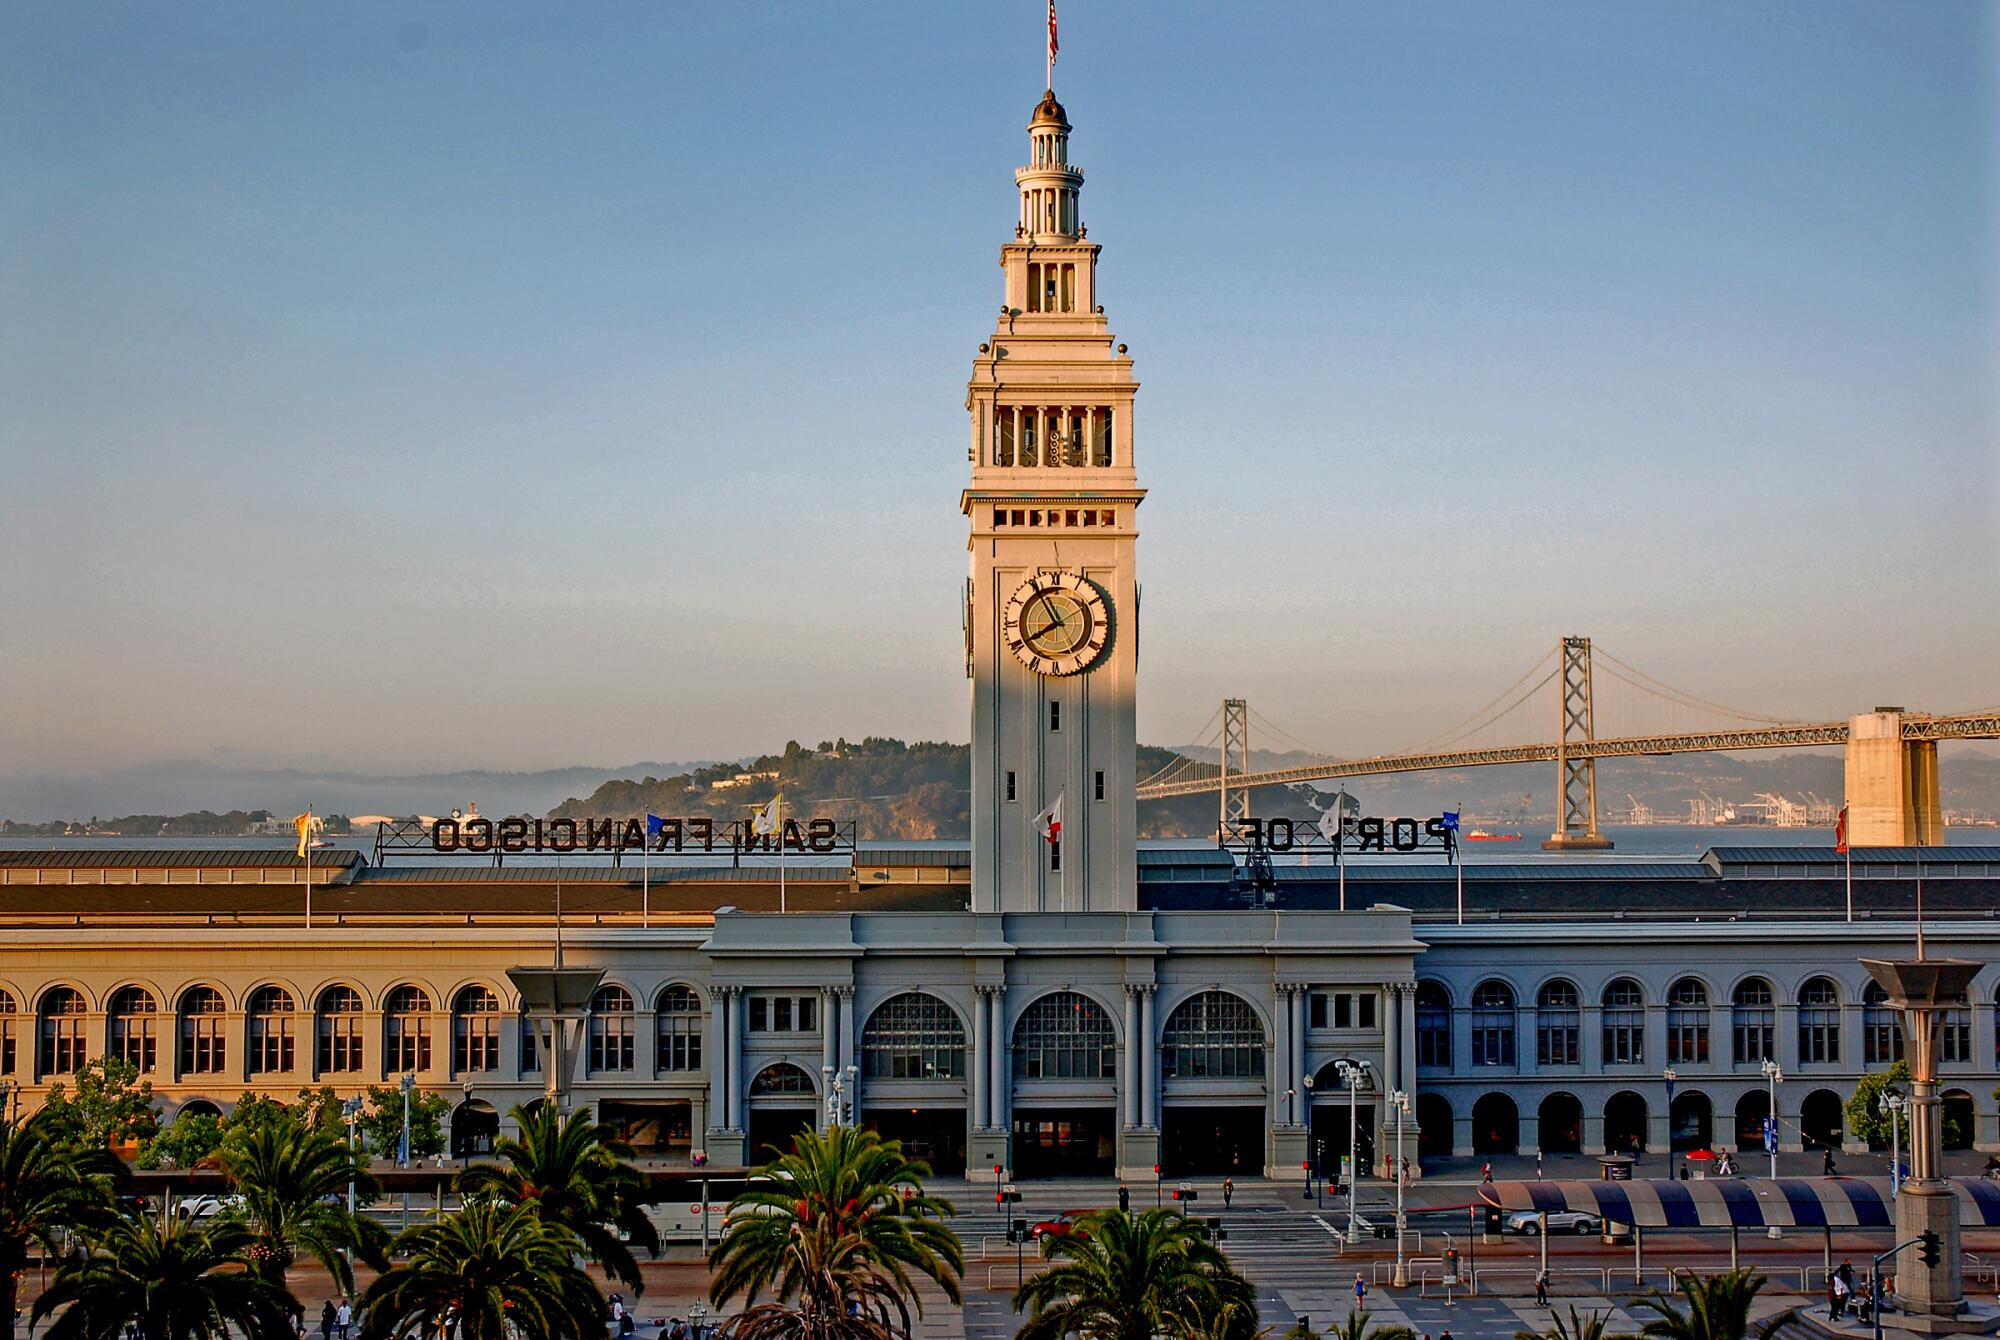 A building with a colonnade of arches and a tall clocktower, with the Golden Gate Bridge in the background.